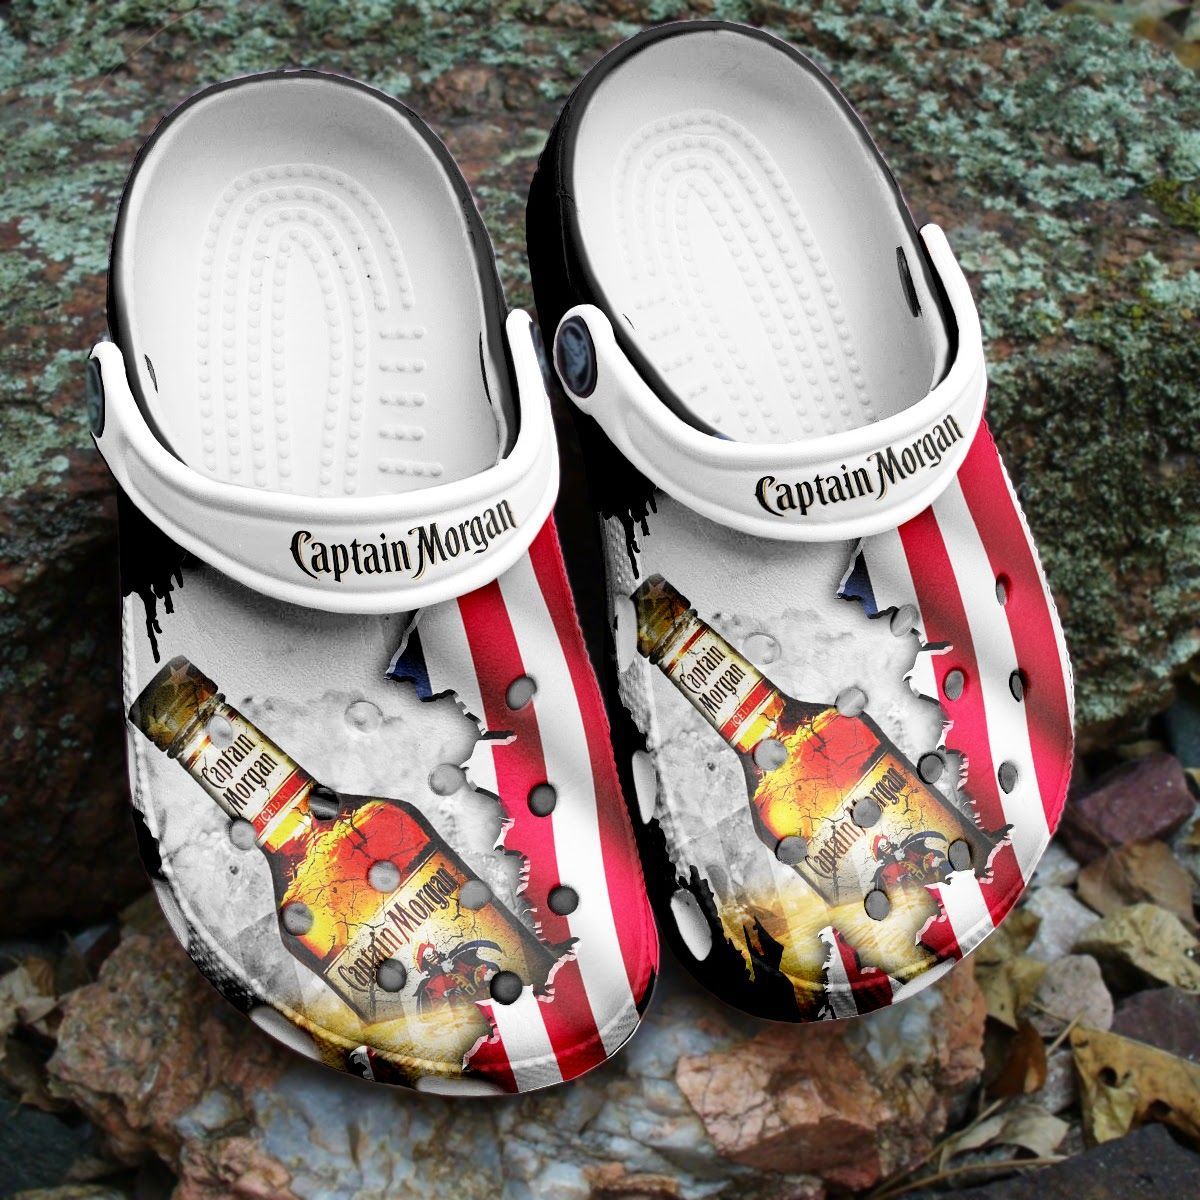 If you'd like to purchase a pair of Crocband Clogs, be sure to check out the official website. 128